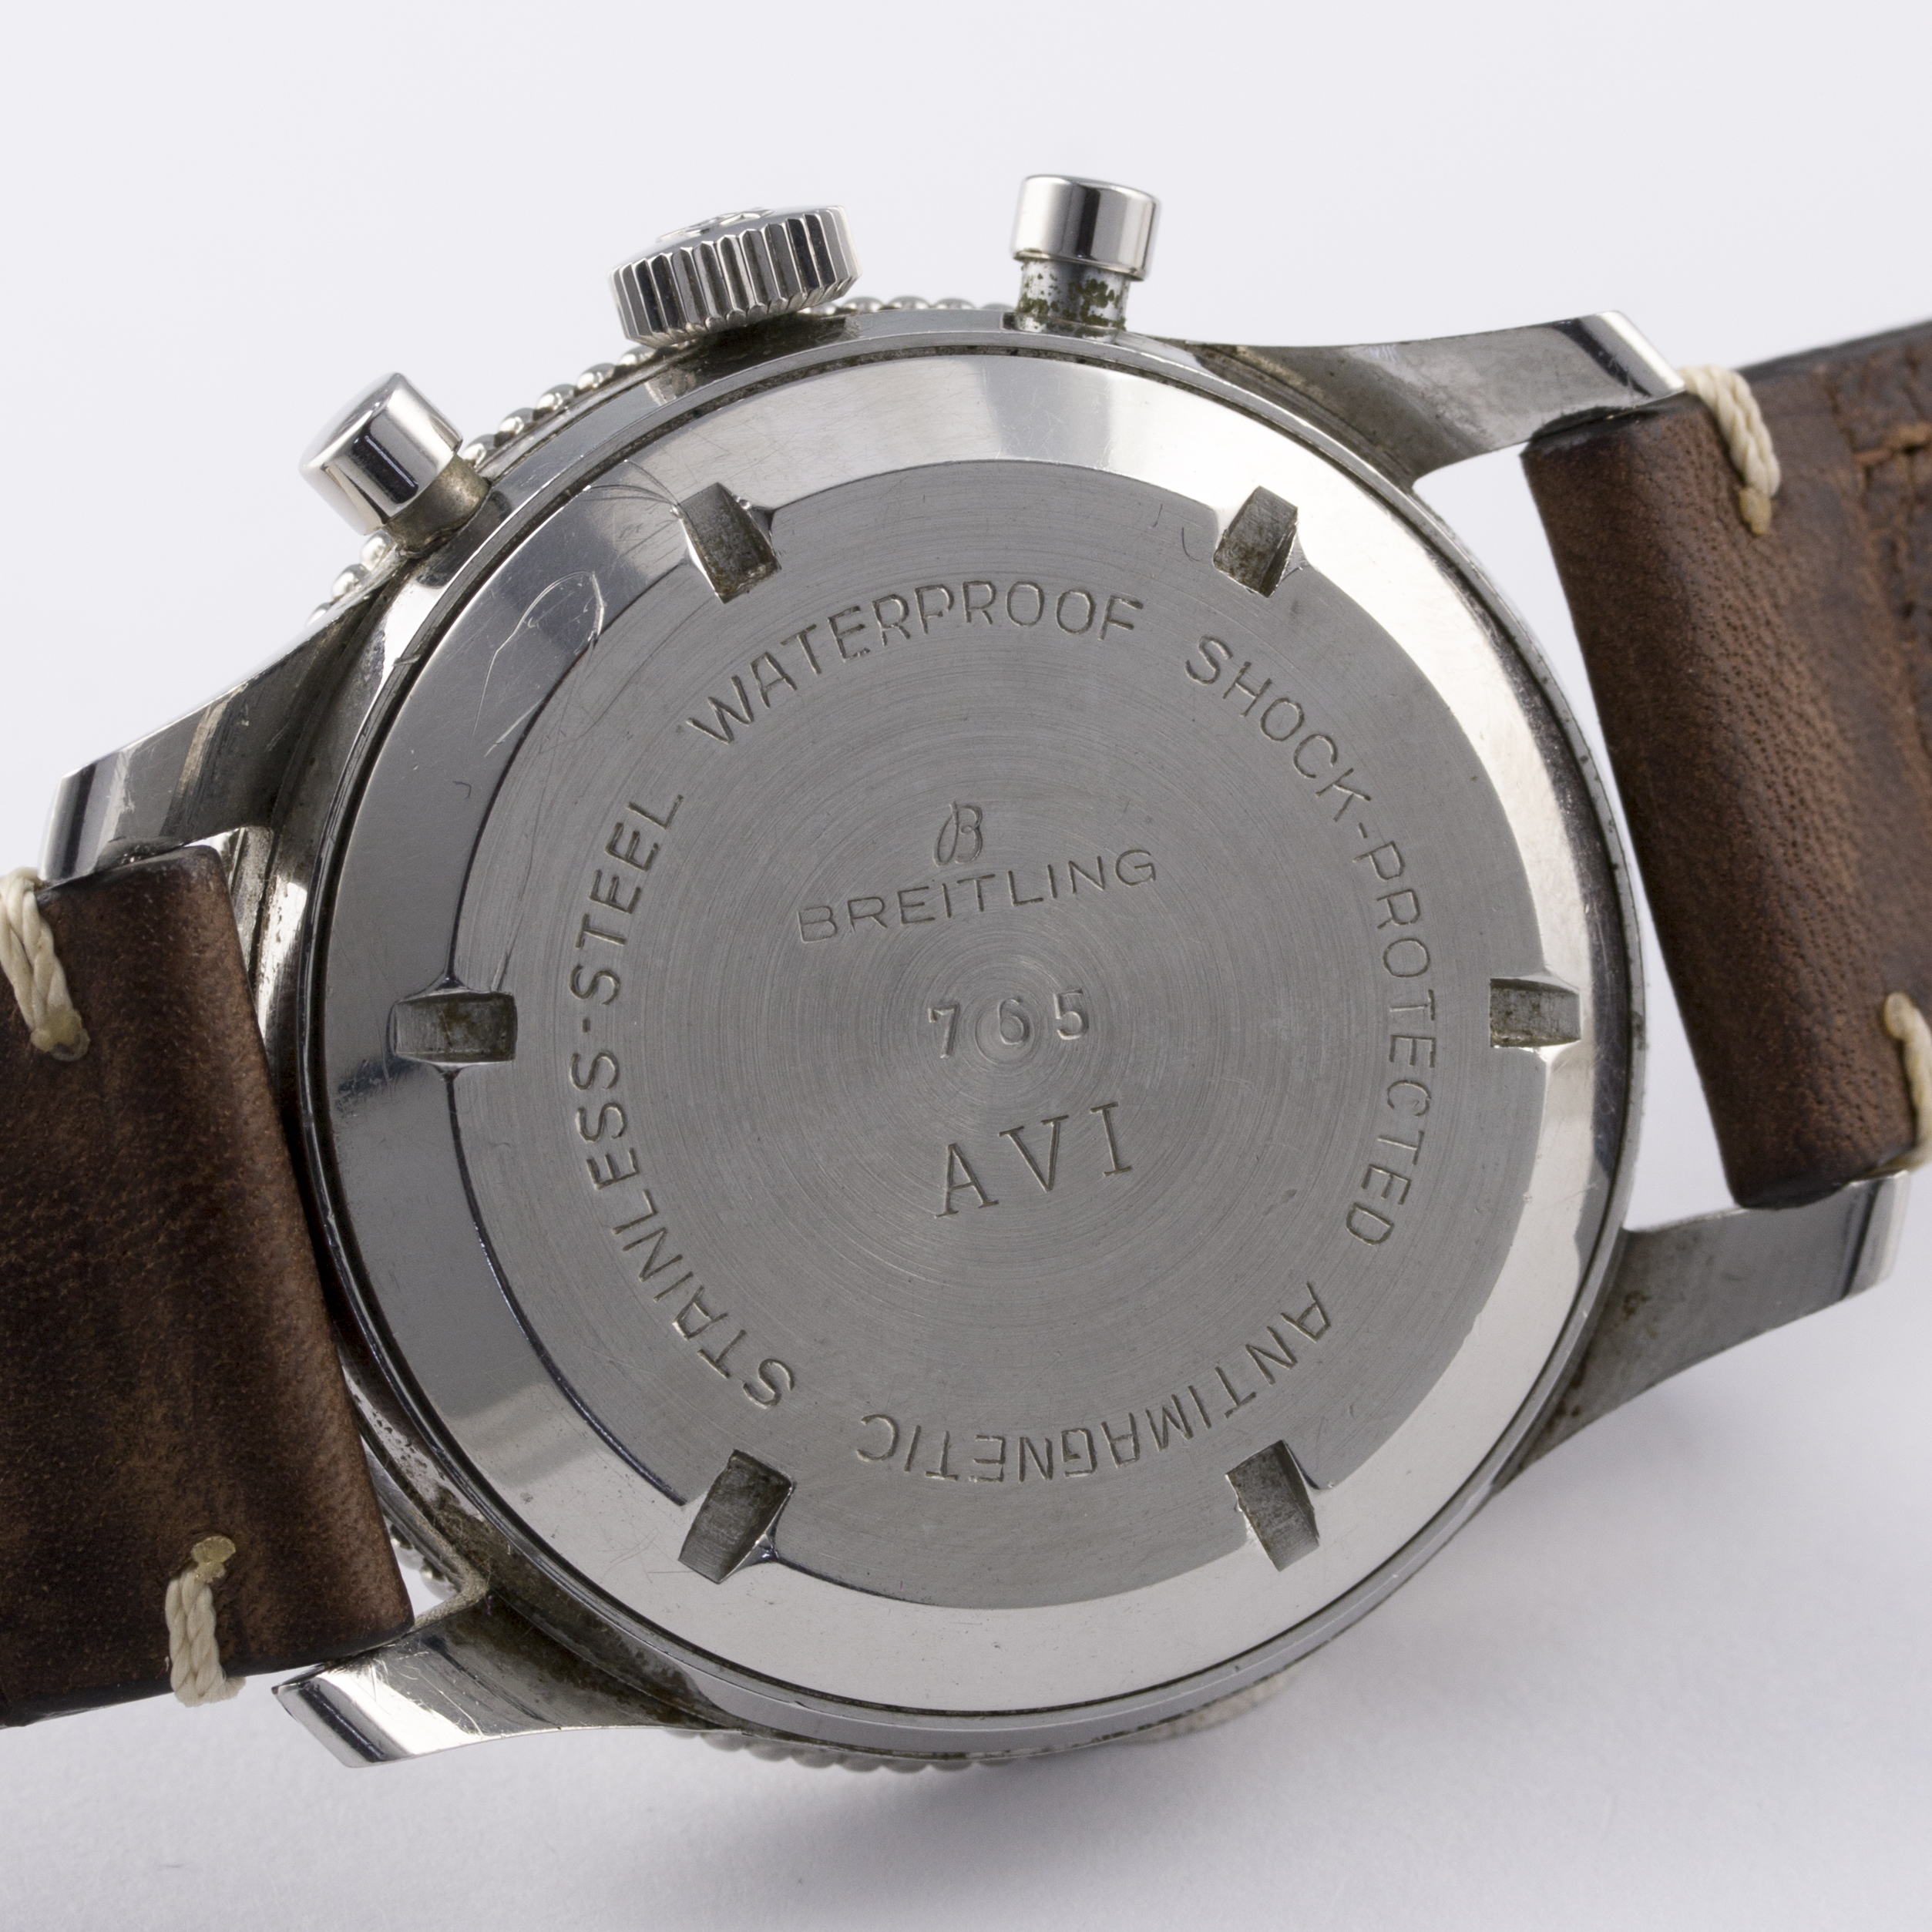 A RARE GENTLEMAN'S STAINLESS STEEL BREITLING AVI CHRONOGRAPH WRIST WATCH CIRCA 1950s, REF. 765 FIRST - Image 7 of 9